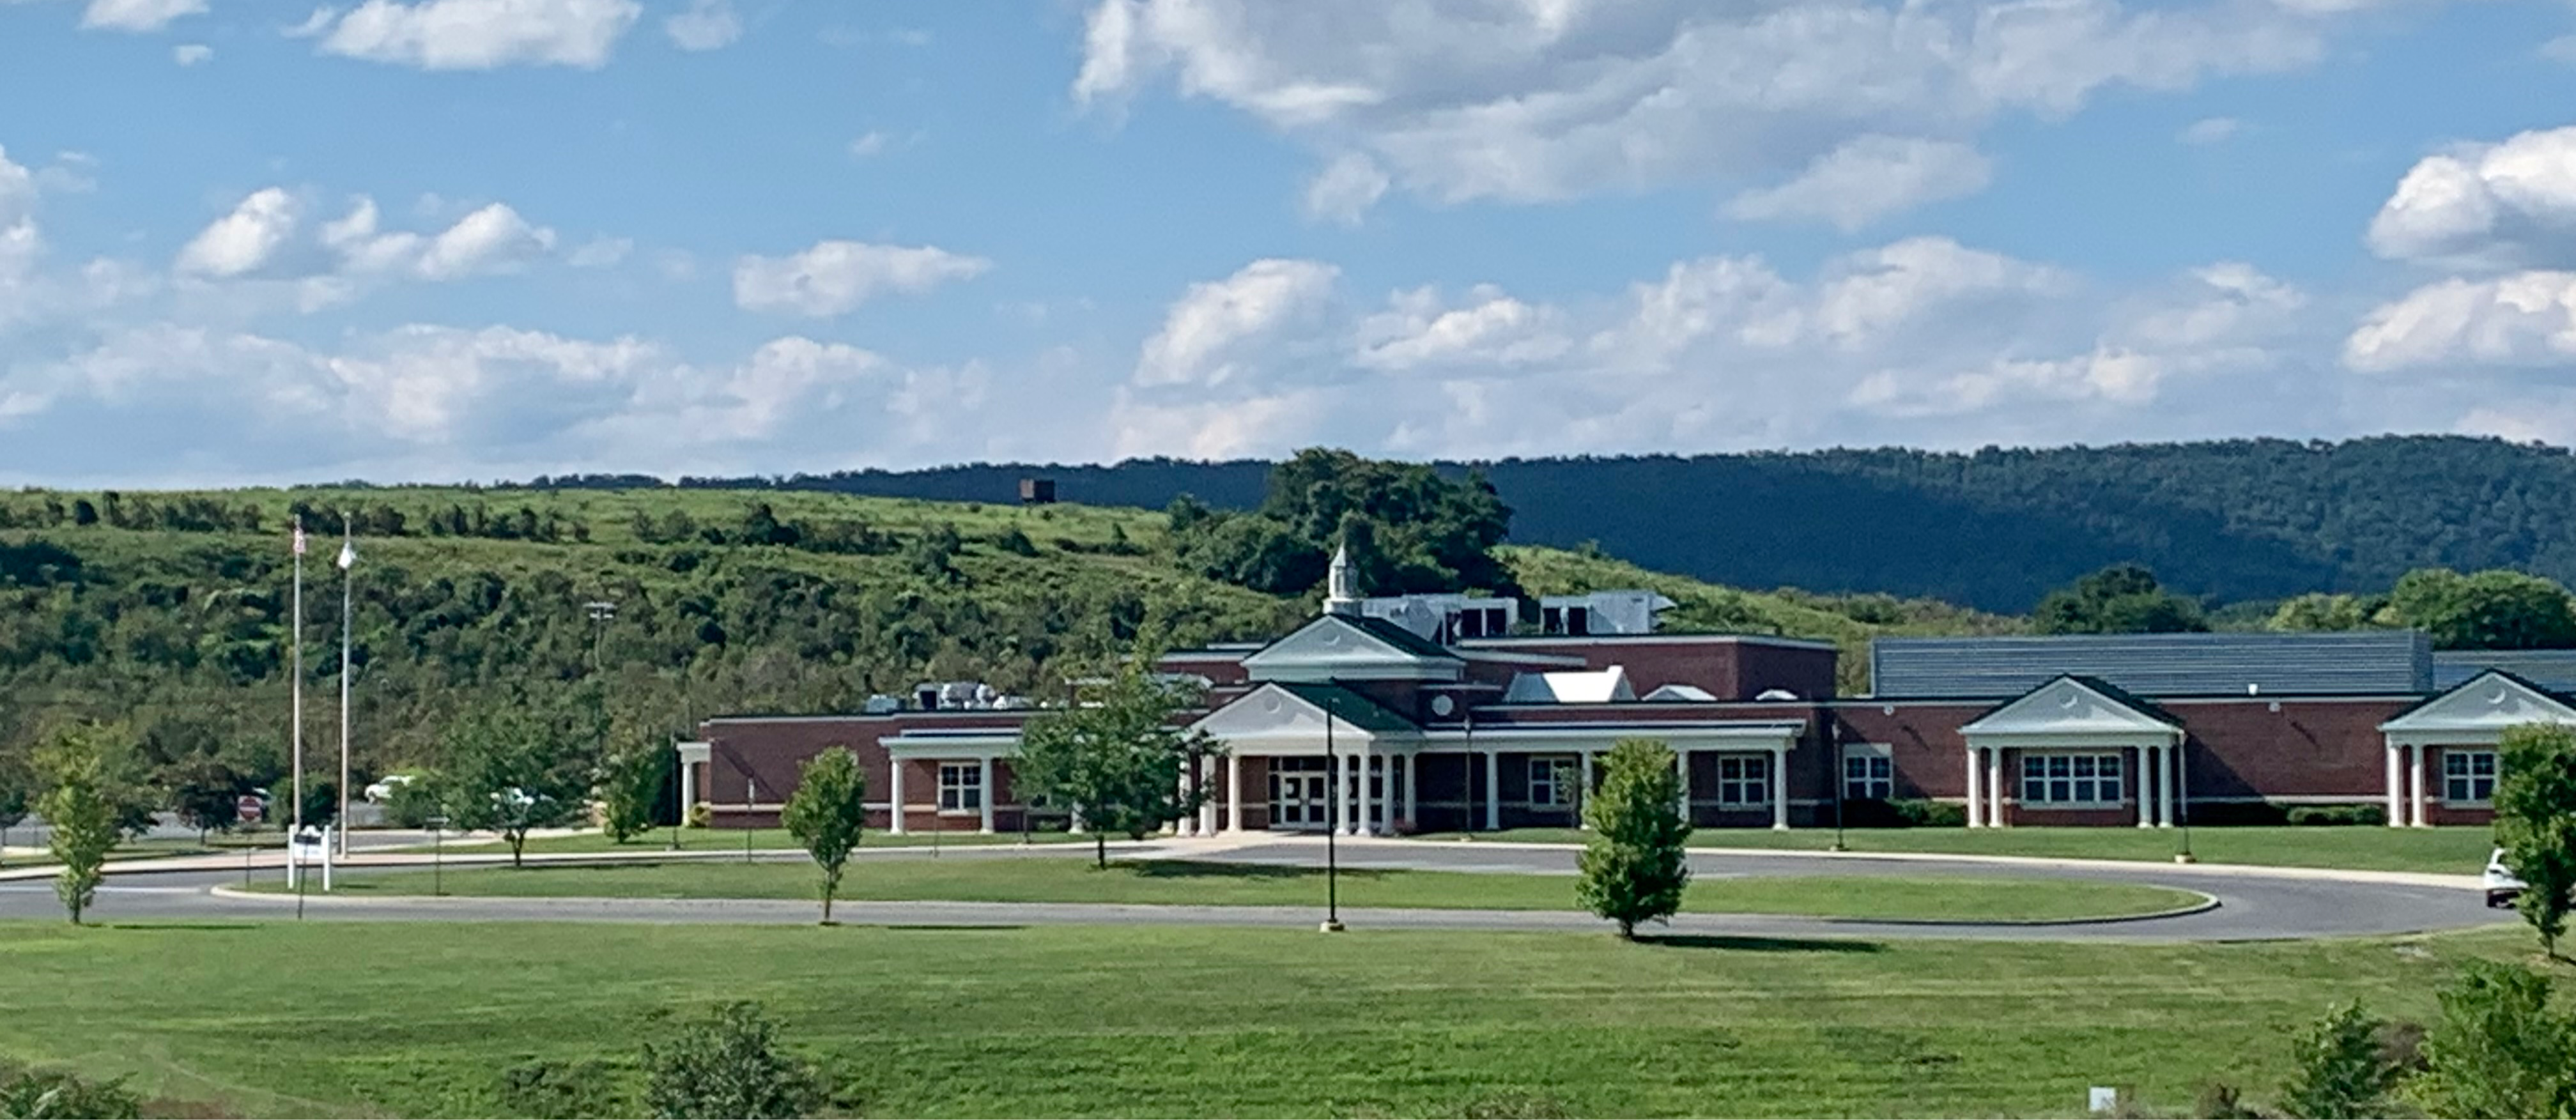 landscape picture of Mountain Ridge Middle brick building with lush green lawn and trees in foreground and blue sky and clouds in background